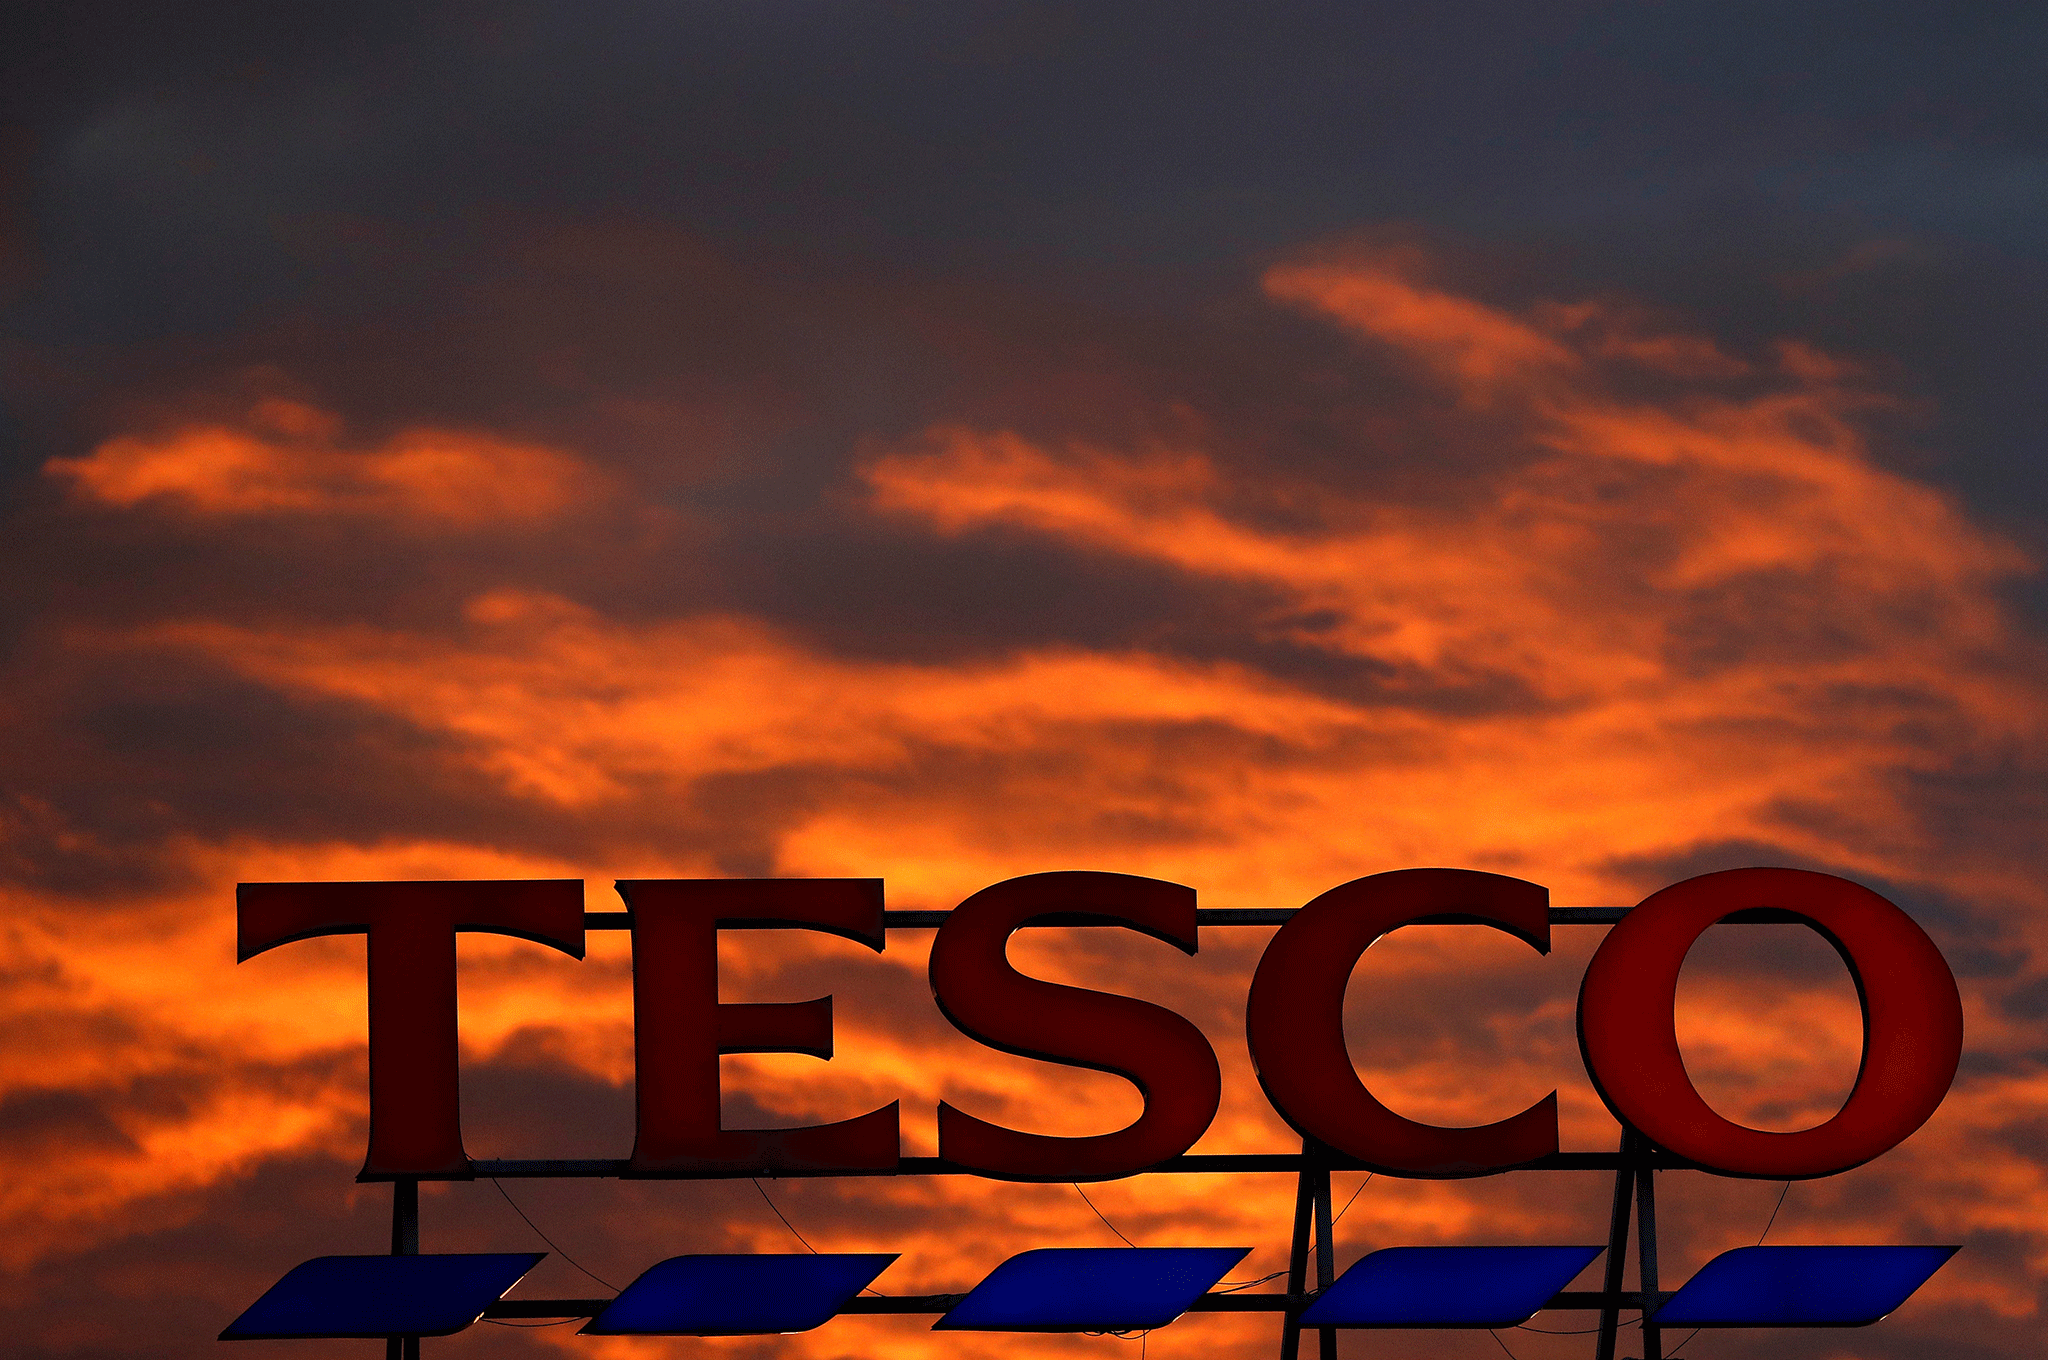 Tesco said it would double-check the accuracy of pricing at all its stores